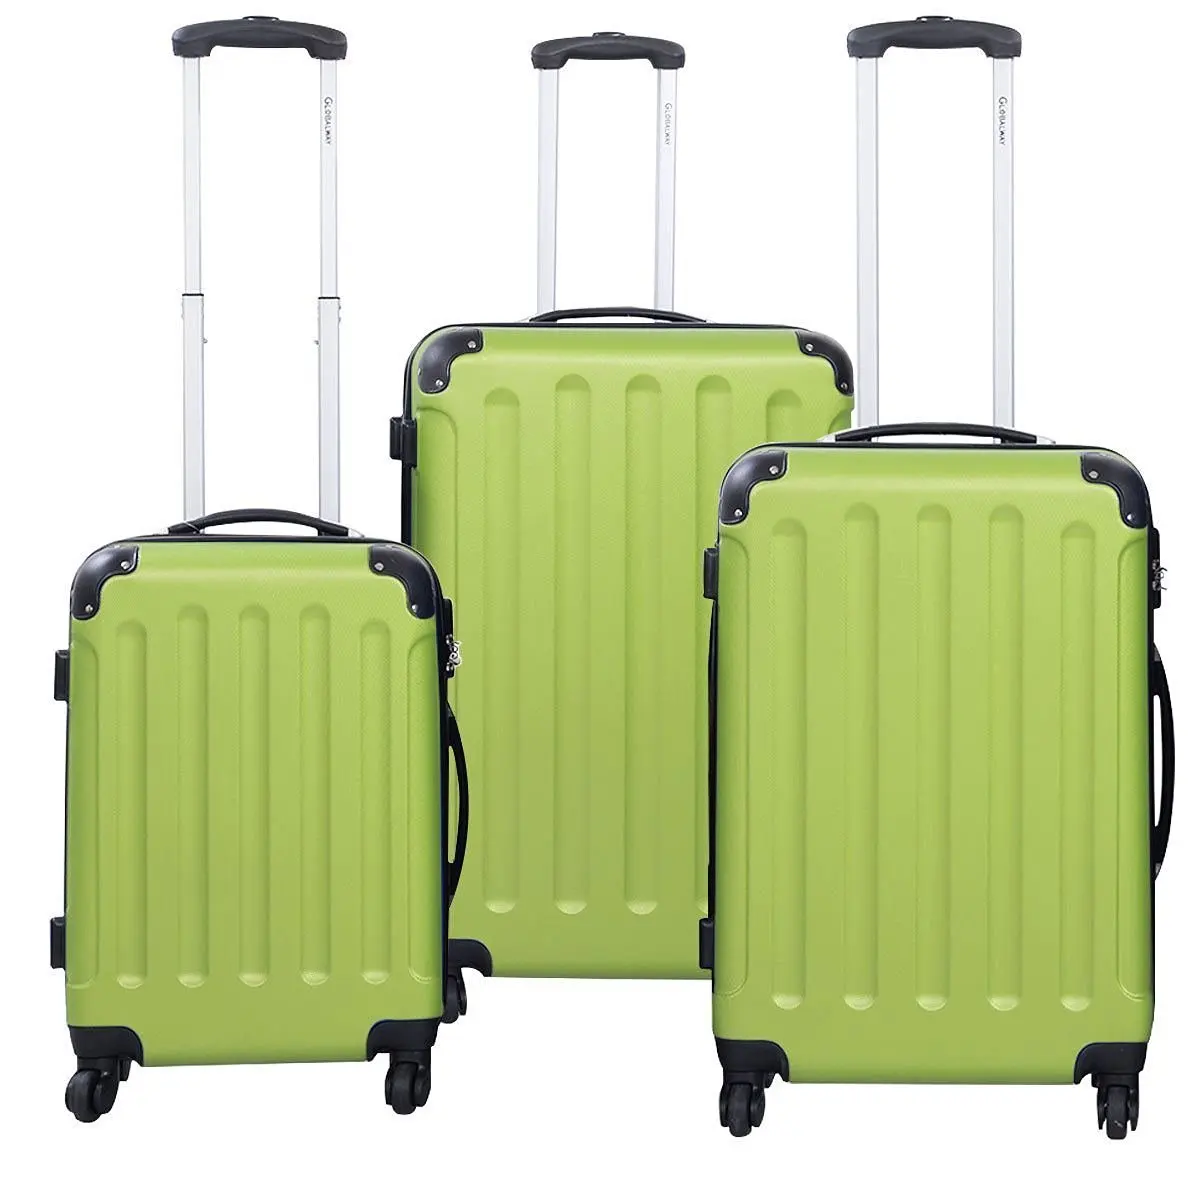 Cheap Green Luggage Set, find Green Luggage Set deals on line at ...